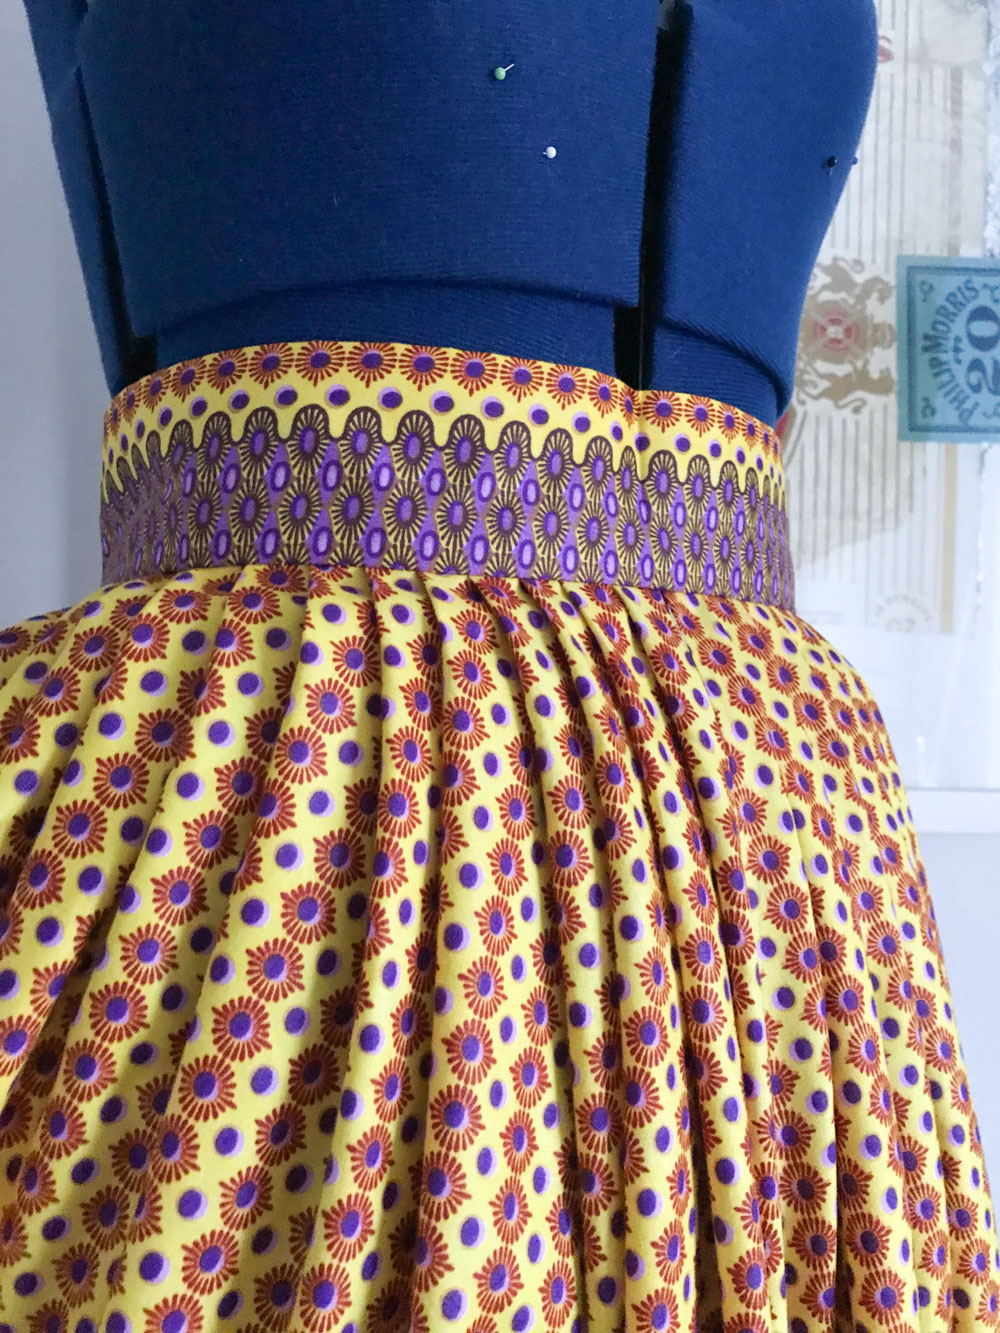 Lucy cowl skirt detail